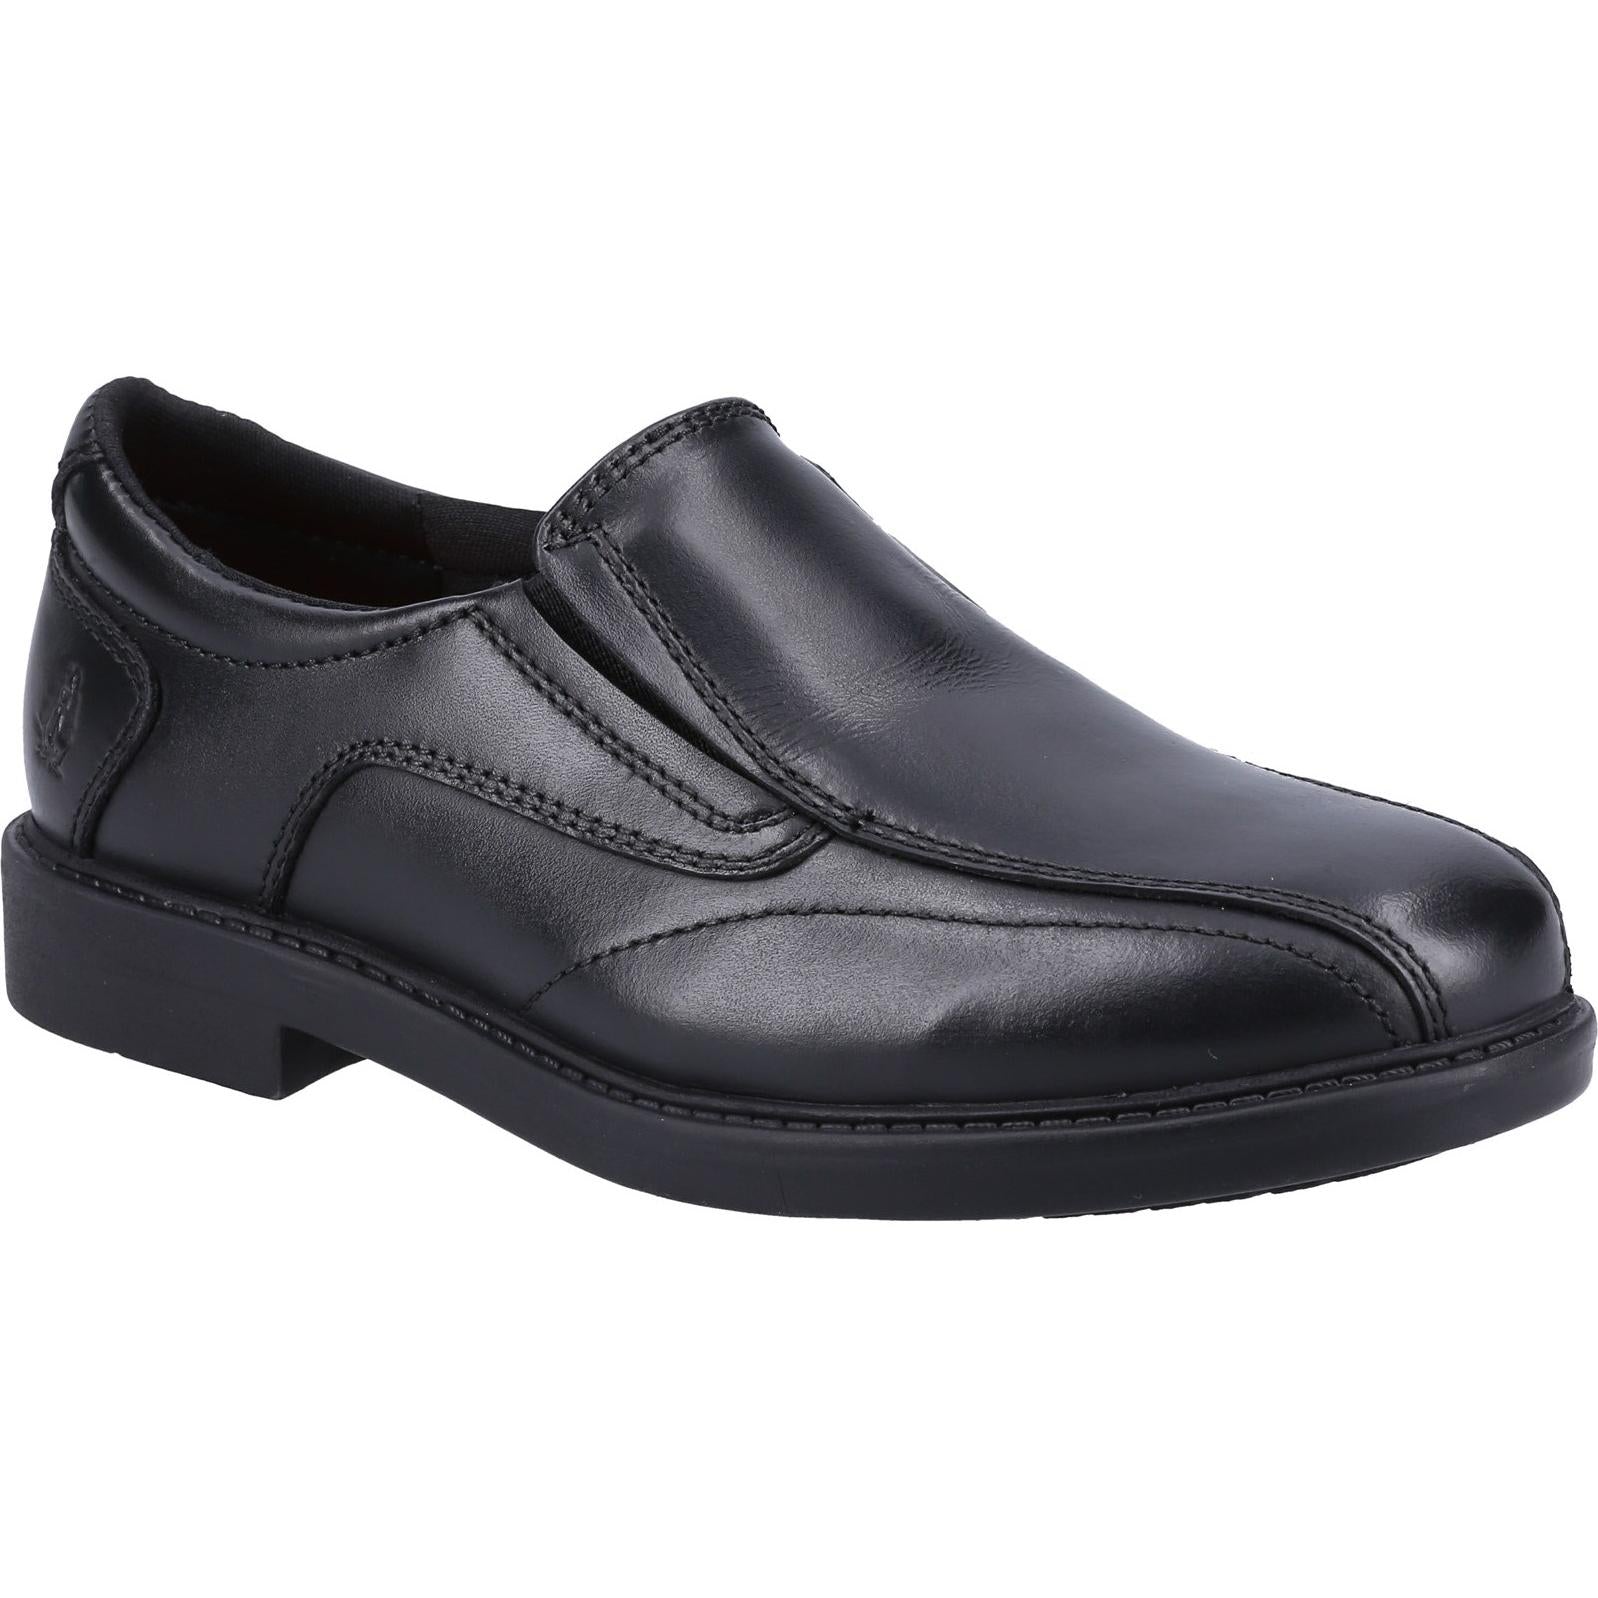 Hush Puppies Toby SNR Shoe